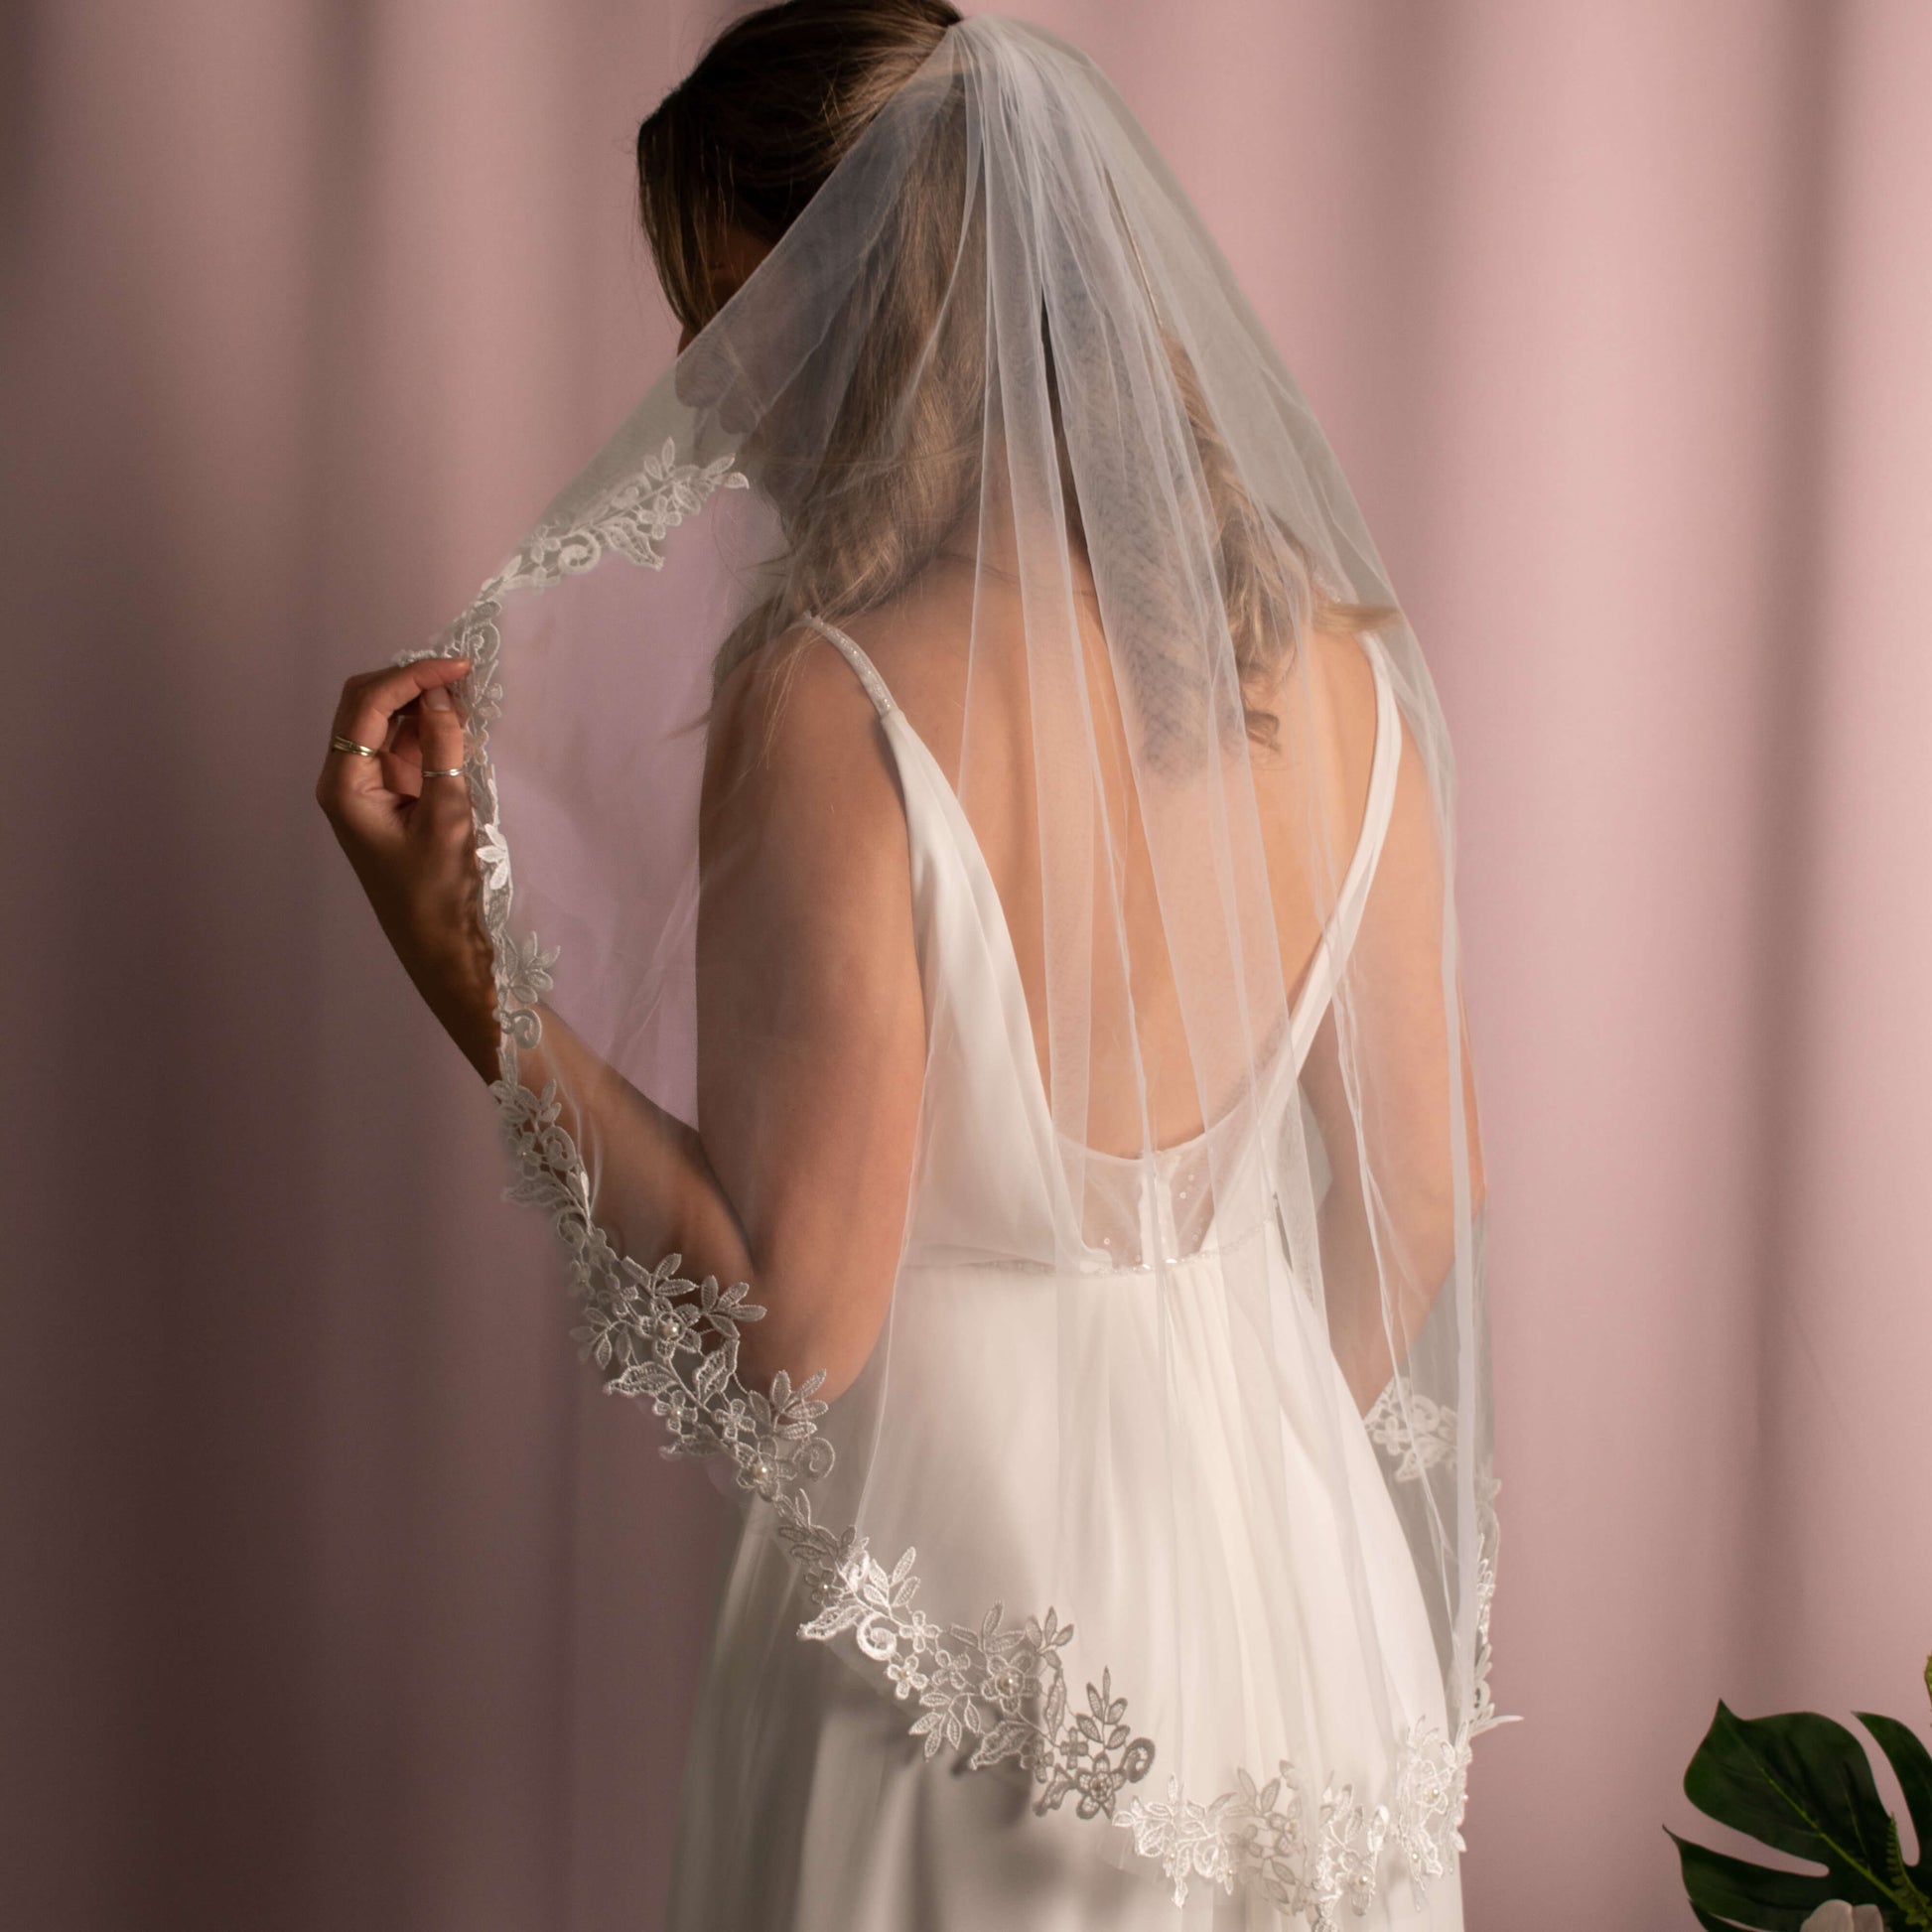 Grace Loves Lace Veil in light ivory, adorned with lace appliqué and pearls, offering a touch of beauty and elegance, easy-fit with a comb, for the modern bride.